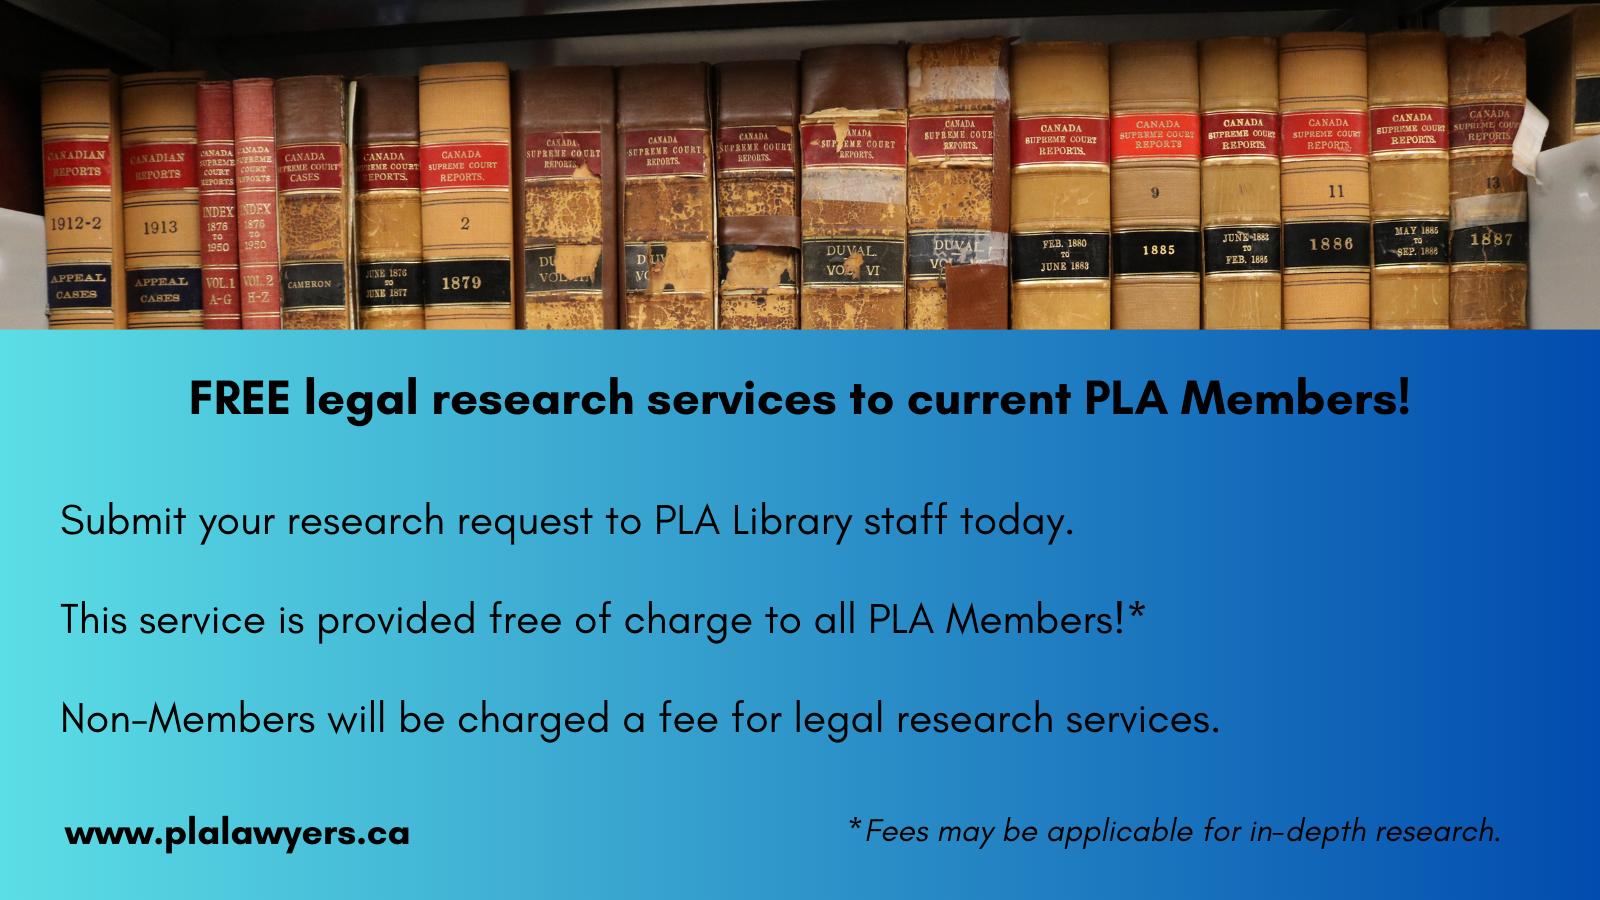 Free legal research services provided to PLA members! Submit your research request to PLA staff today. Non-members will be charged a fee for legal research services. (Note: Fees may be applicable for in-depth research requests)